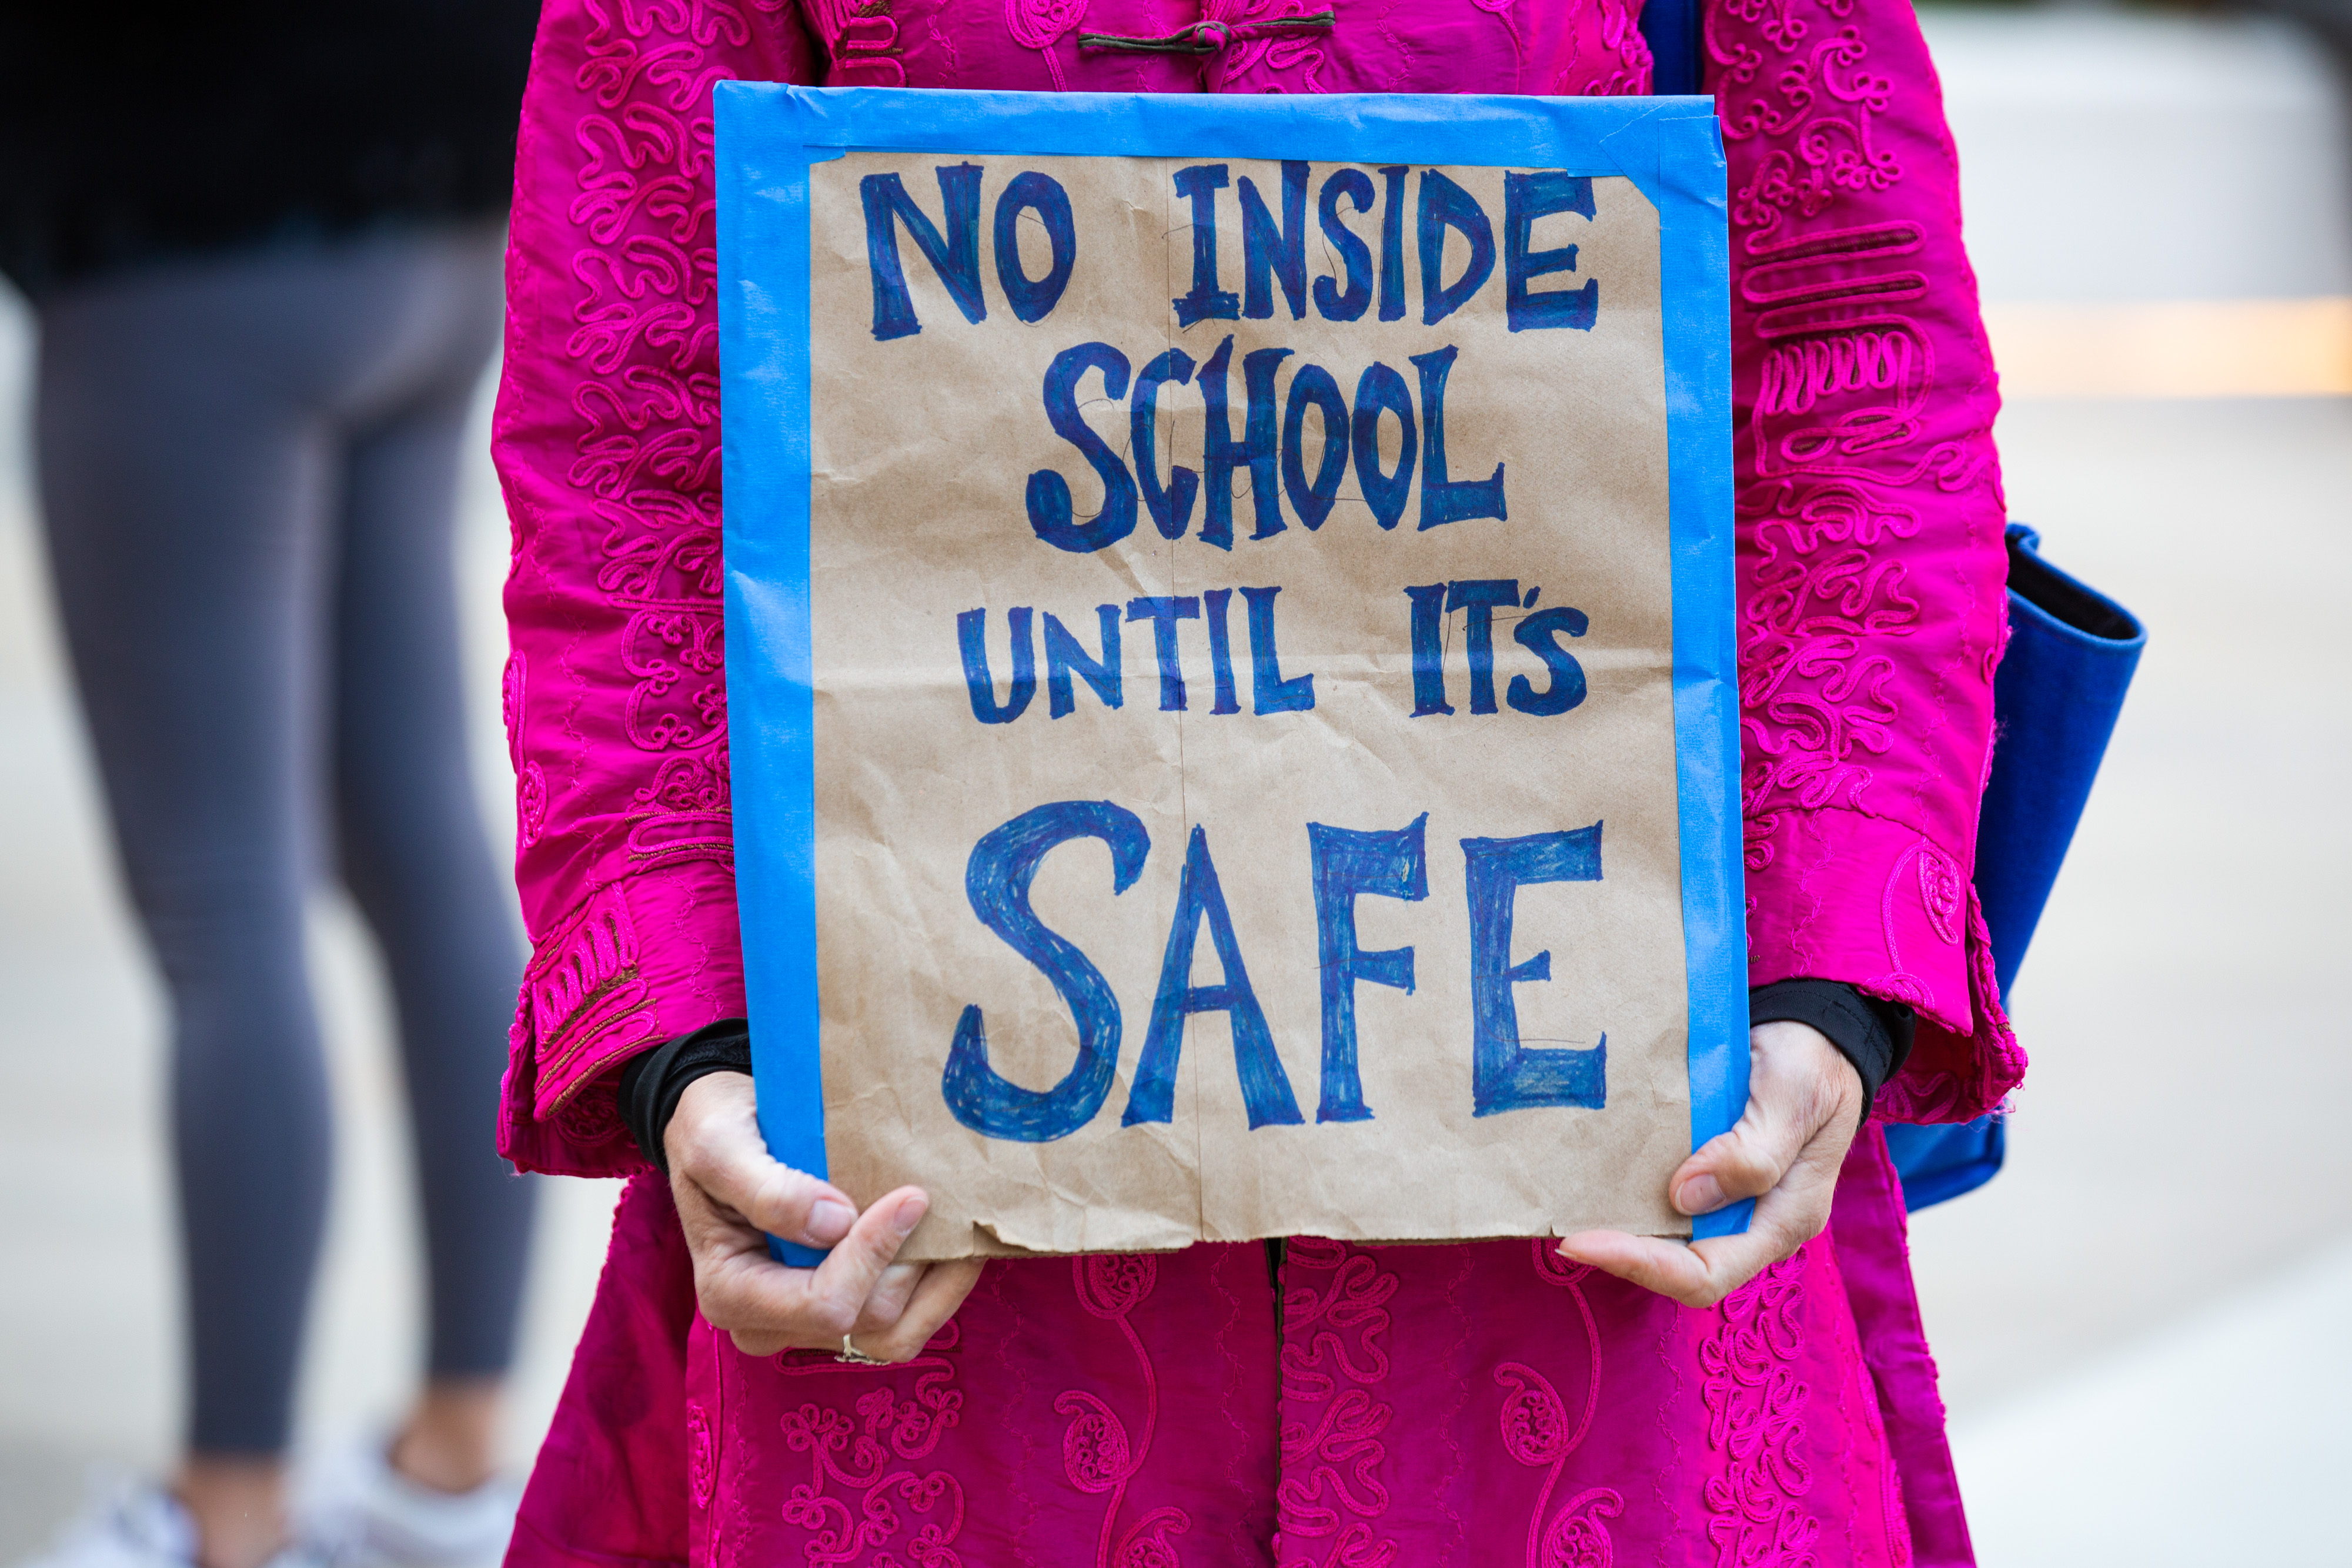 A parent holds a sign reading "No inside school until it's safe" during a protest outside Murry Bergtraum High School in New York City on Sept. 21, 2020. (Paul Frangipane—Bloomberg/Getty Images)